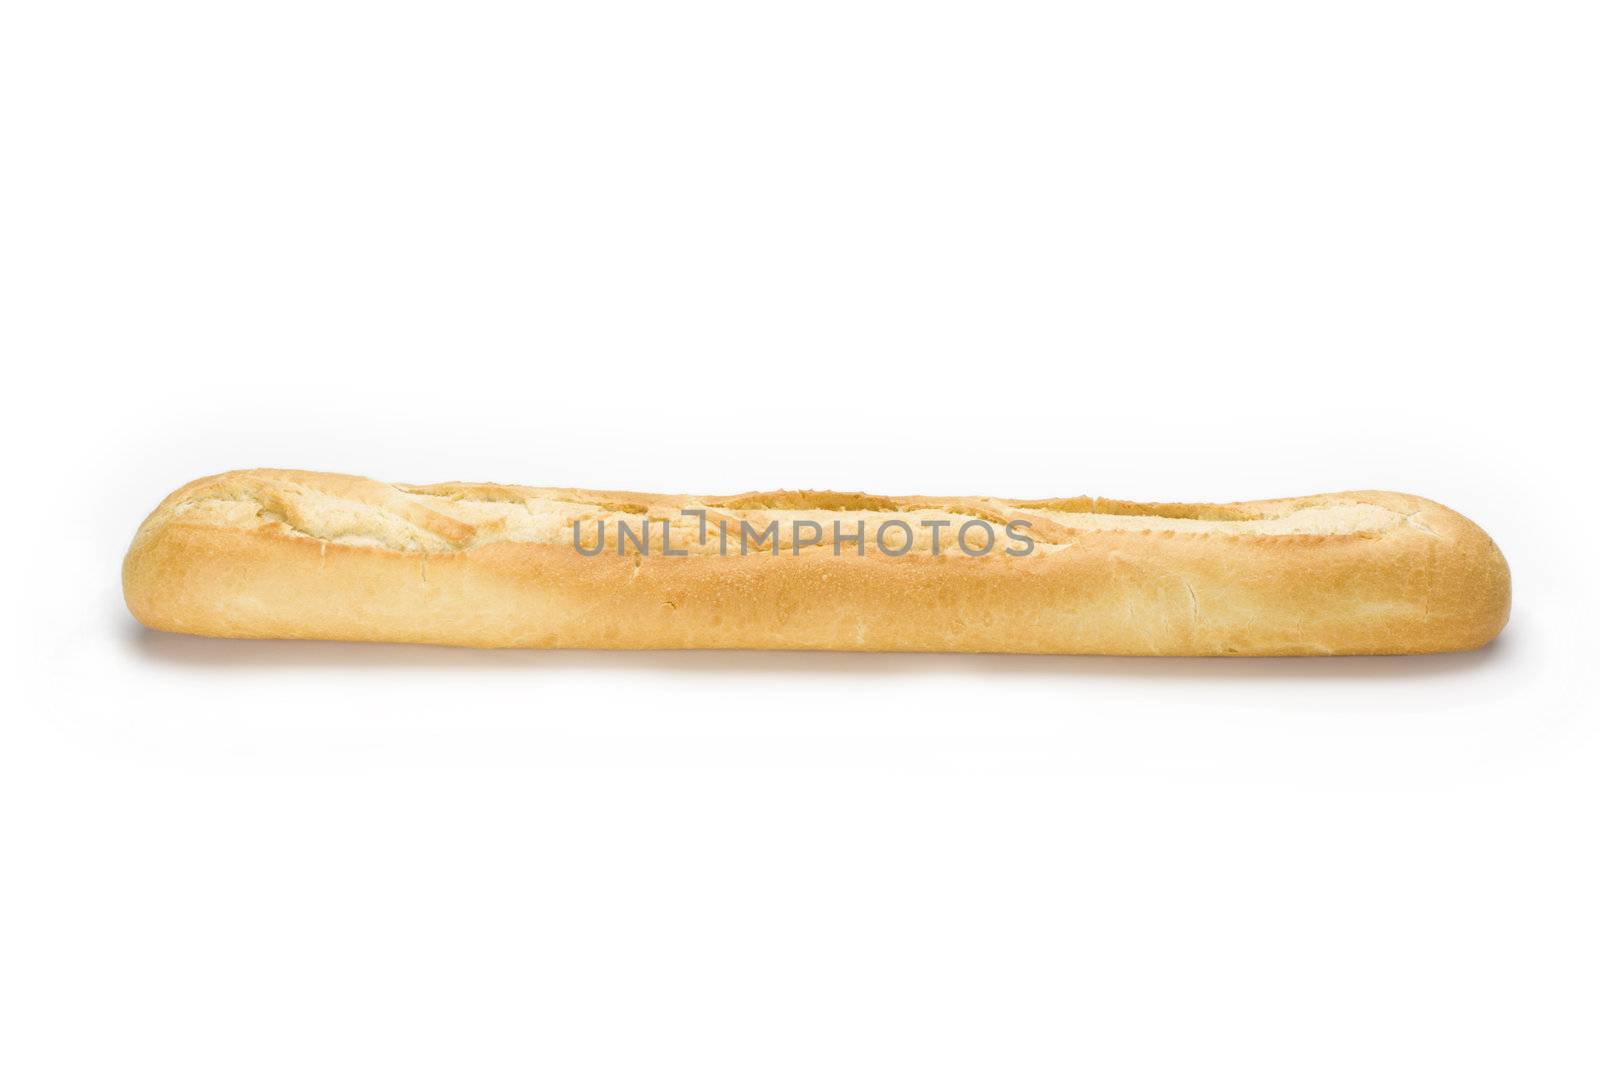 baguette bread isolated on white background